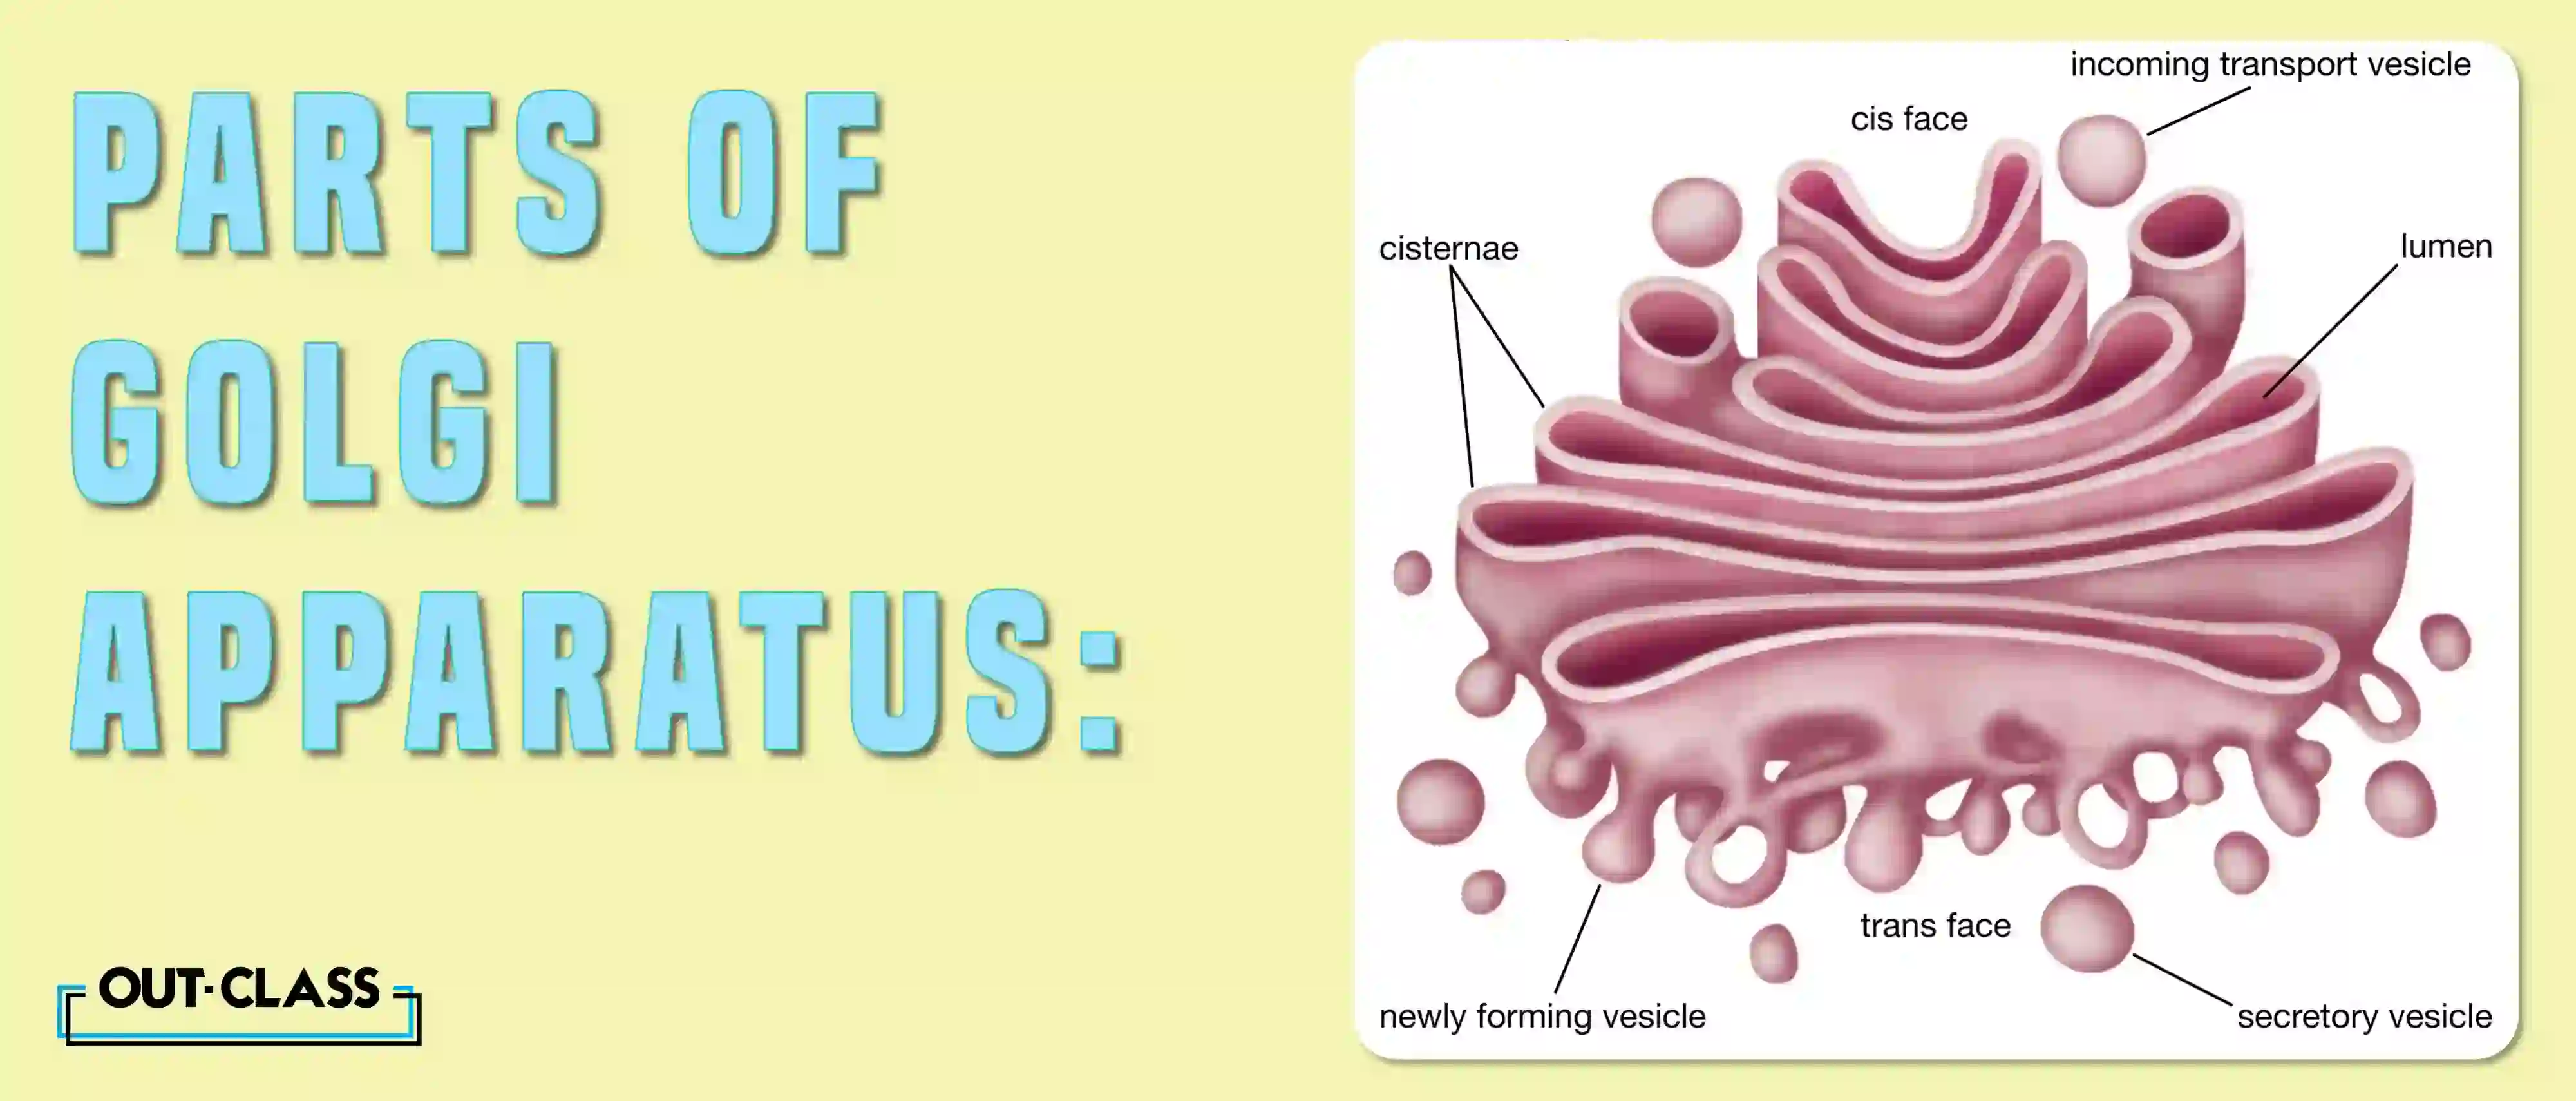 Golgi apparatus structure is consists of four main parts - flattened, stacked pouches called cisternae, matrix proteins called microtubules, medial and trans. These are crucial for its function as they process and bundle macromolecules like proteins and lipids, in both animal and plant cells.